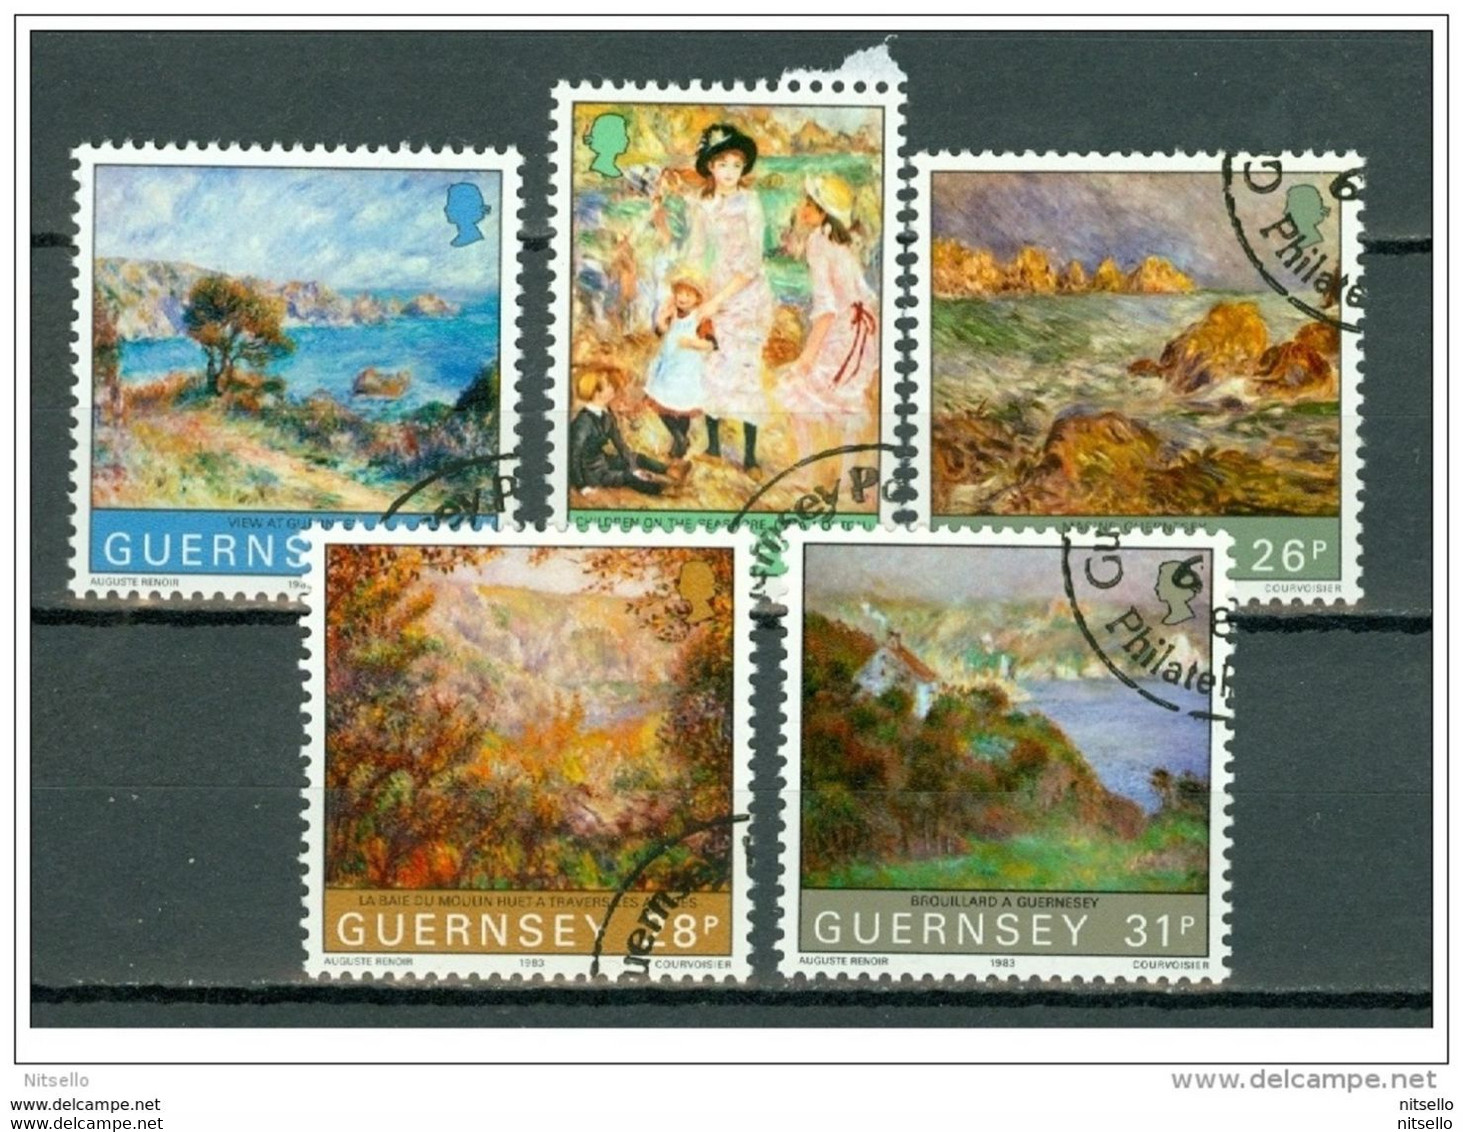 LOTE 2221 ///  (C130) GUERNESEY 1983 Yv. 271/275, SG 277/281 (o) Cote Yv. € 7€ ¡¡¡ OFERTA - LIQUIDATION - JE LIQUIDE !! - Guernsey